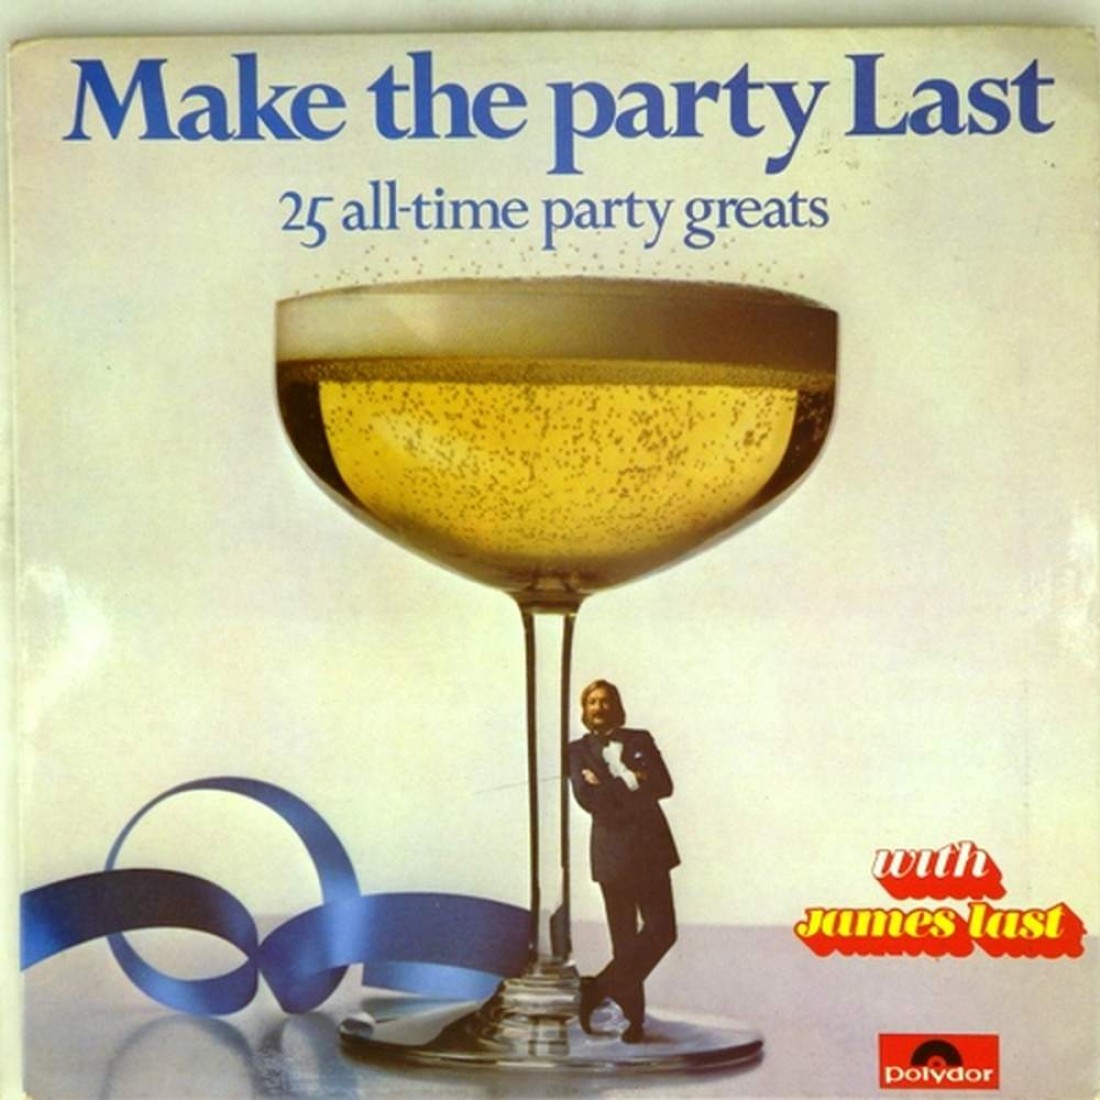 When the party last night. Make the Party last альбом. James last Orchestra обложки. James last - the album collection (25 CD).